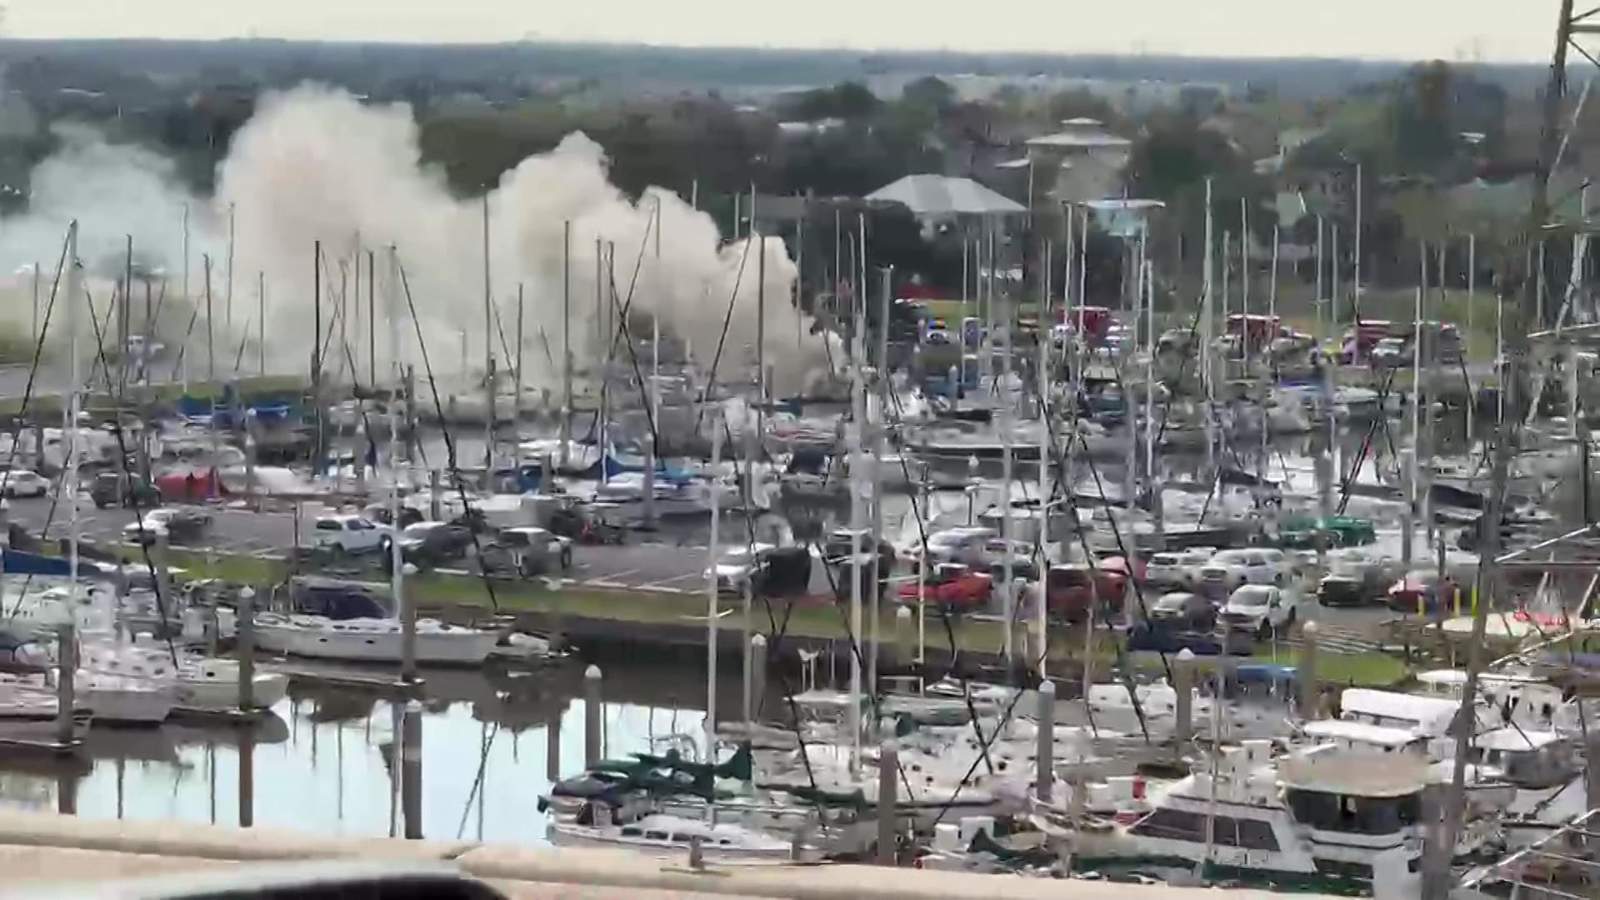 Boat fire sends plume of smoke into skies over Clear Lake Shores